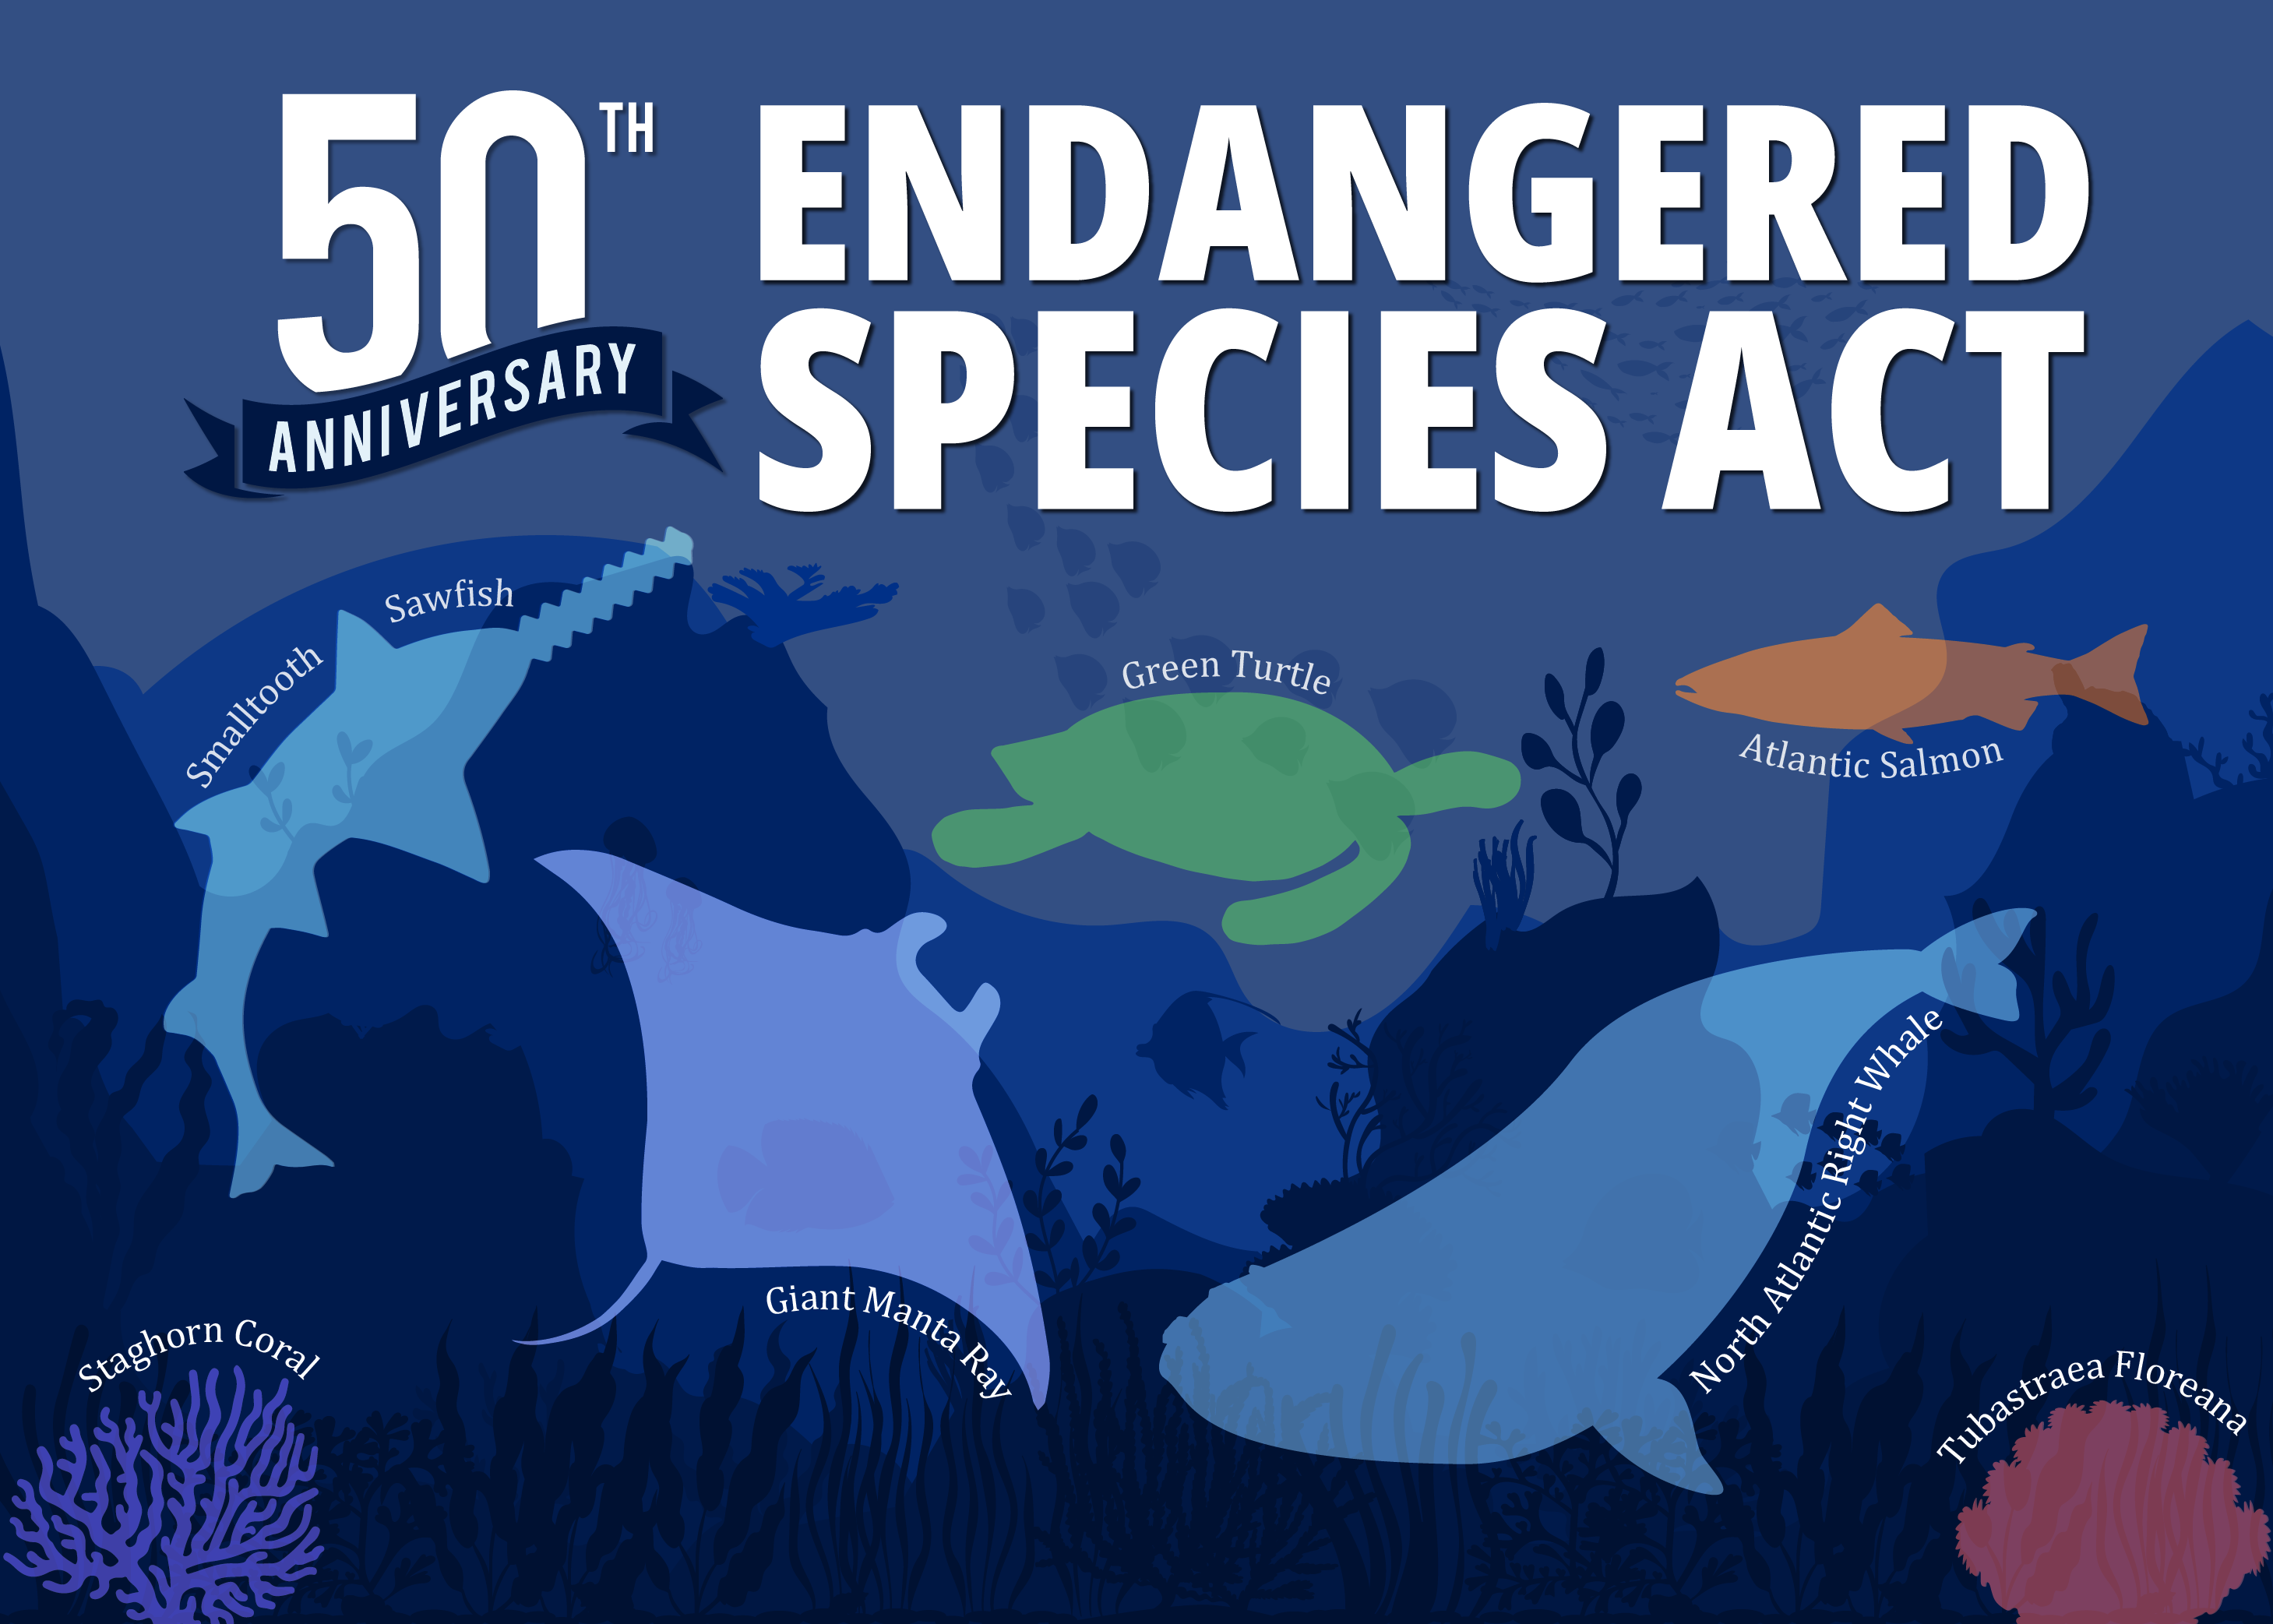 Image: The Endangered Species Act: 50 Years of Conserving Species